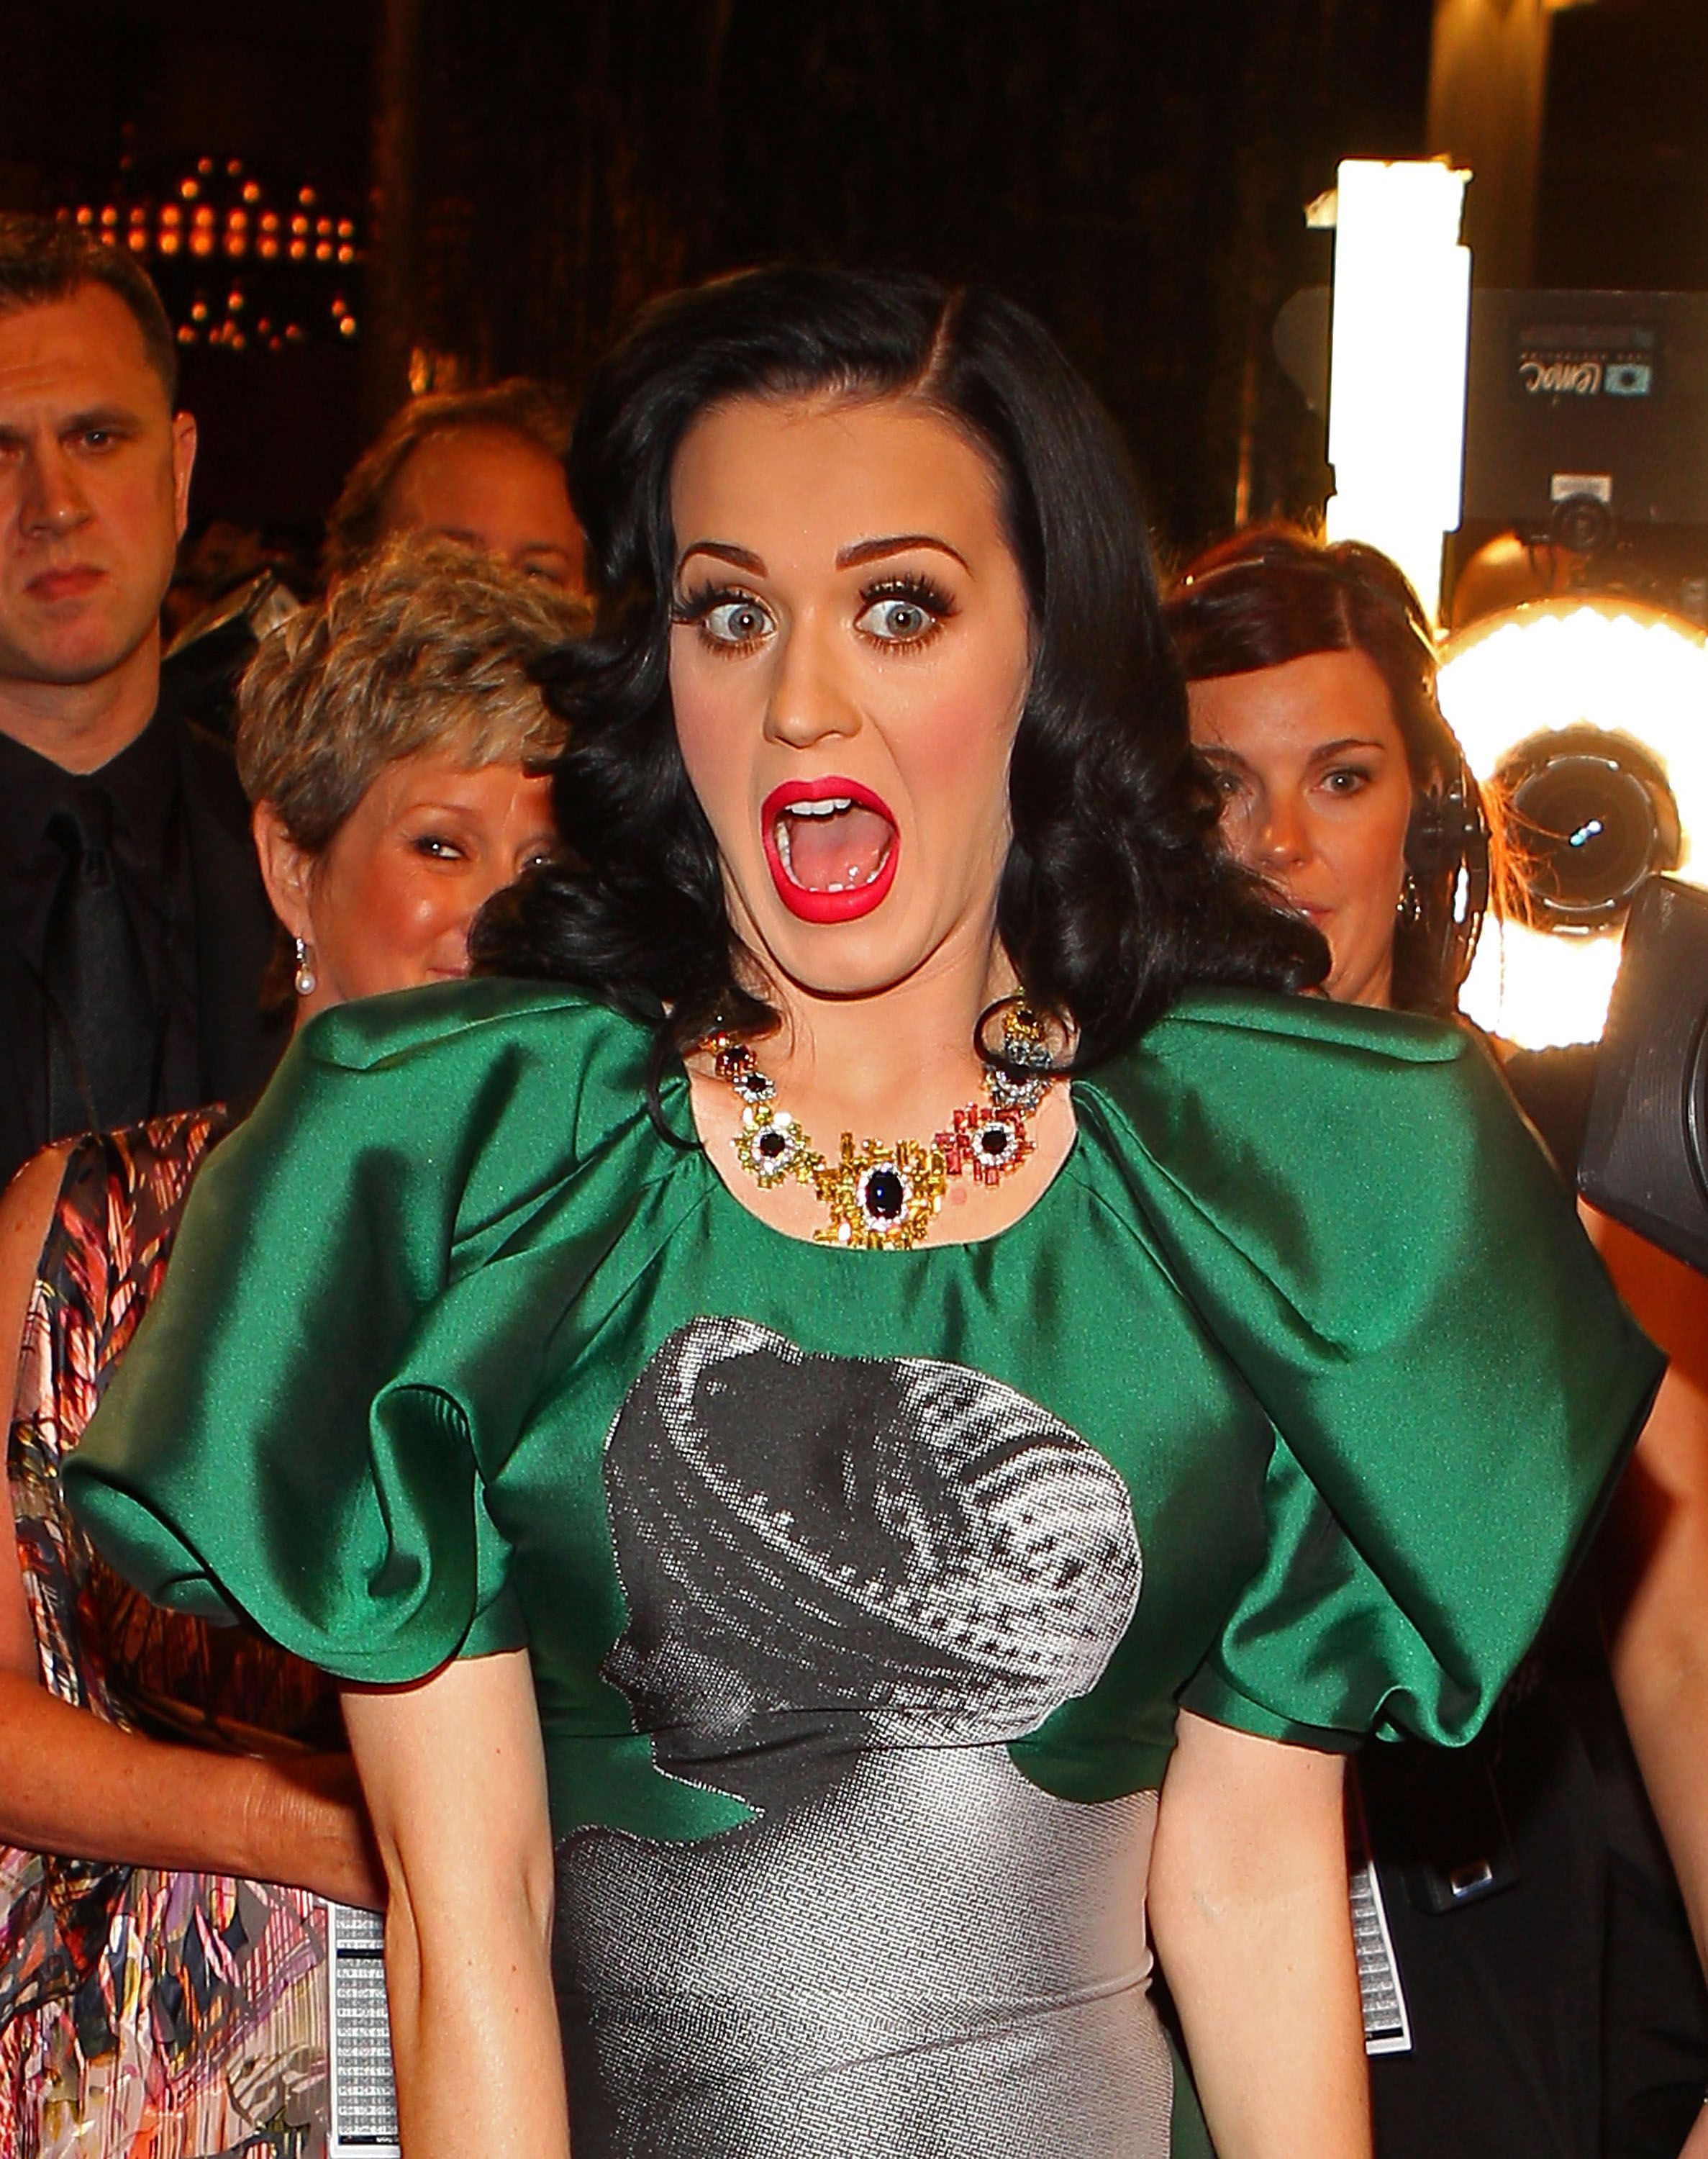 Katy Perry Solo Porn - Katy Perry is going fully naked on Instagram... to help the world!